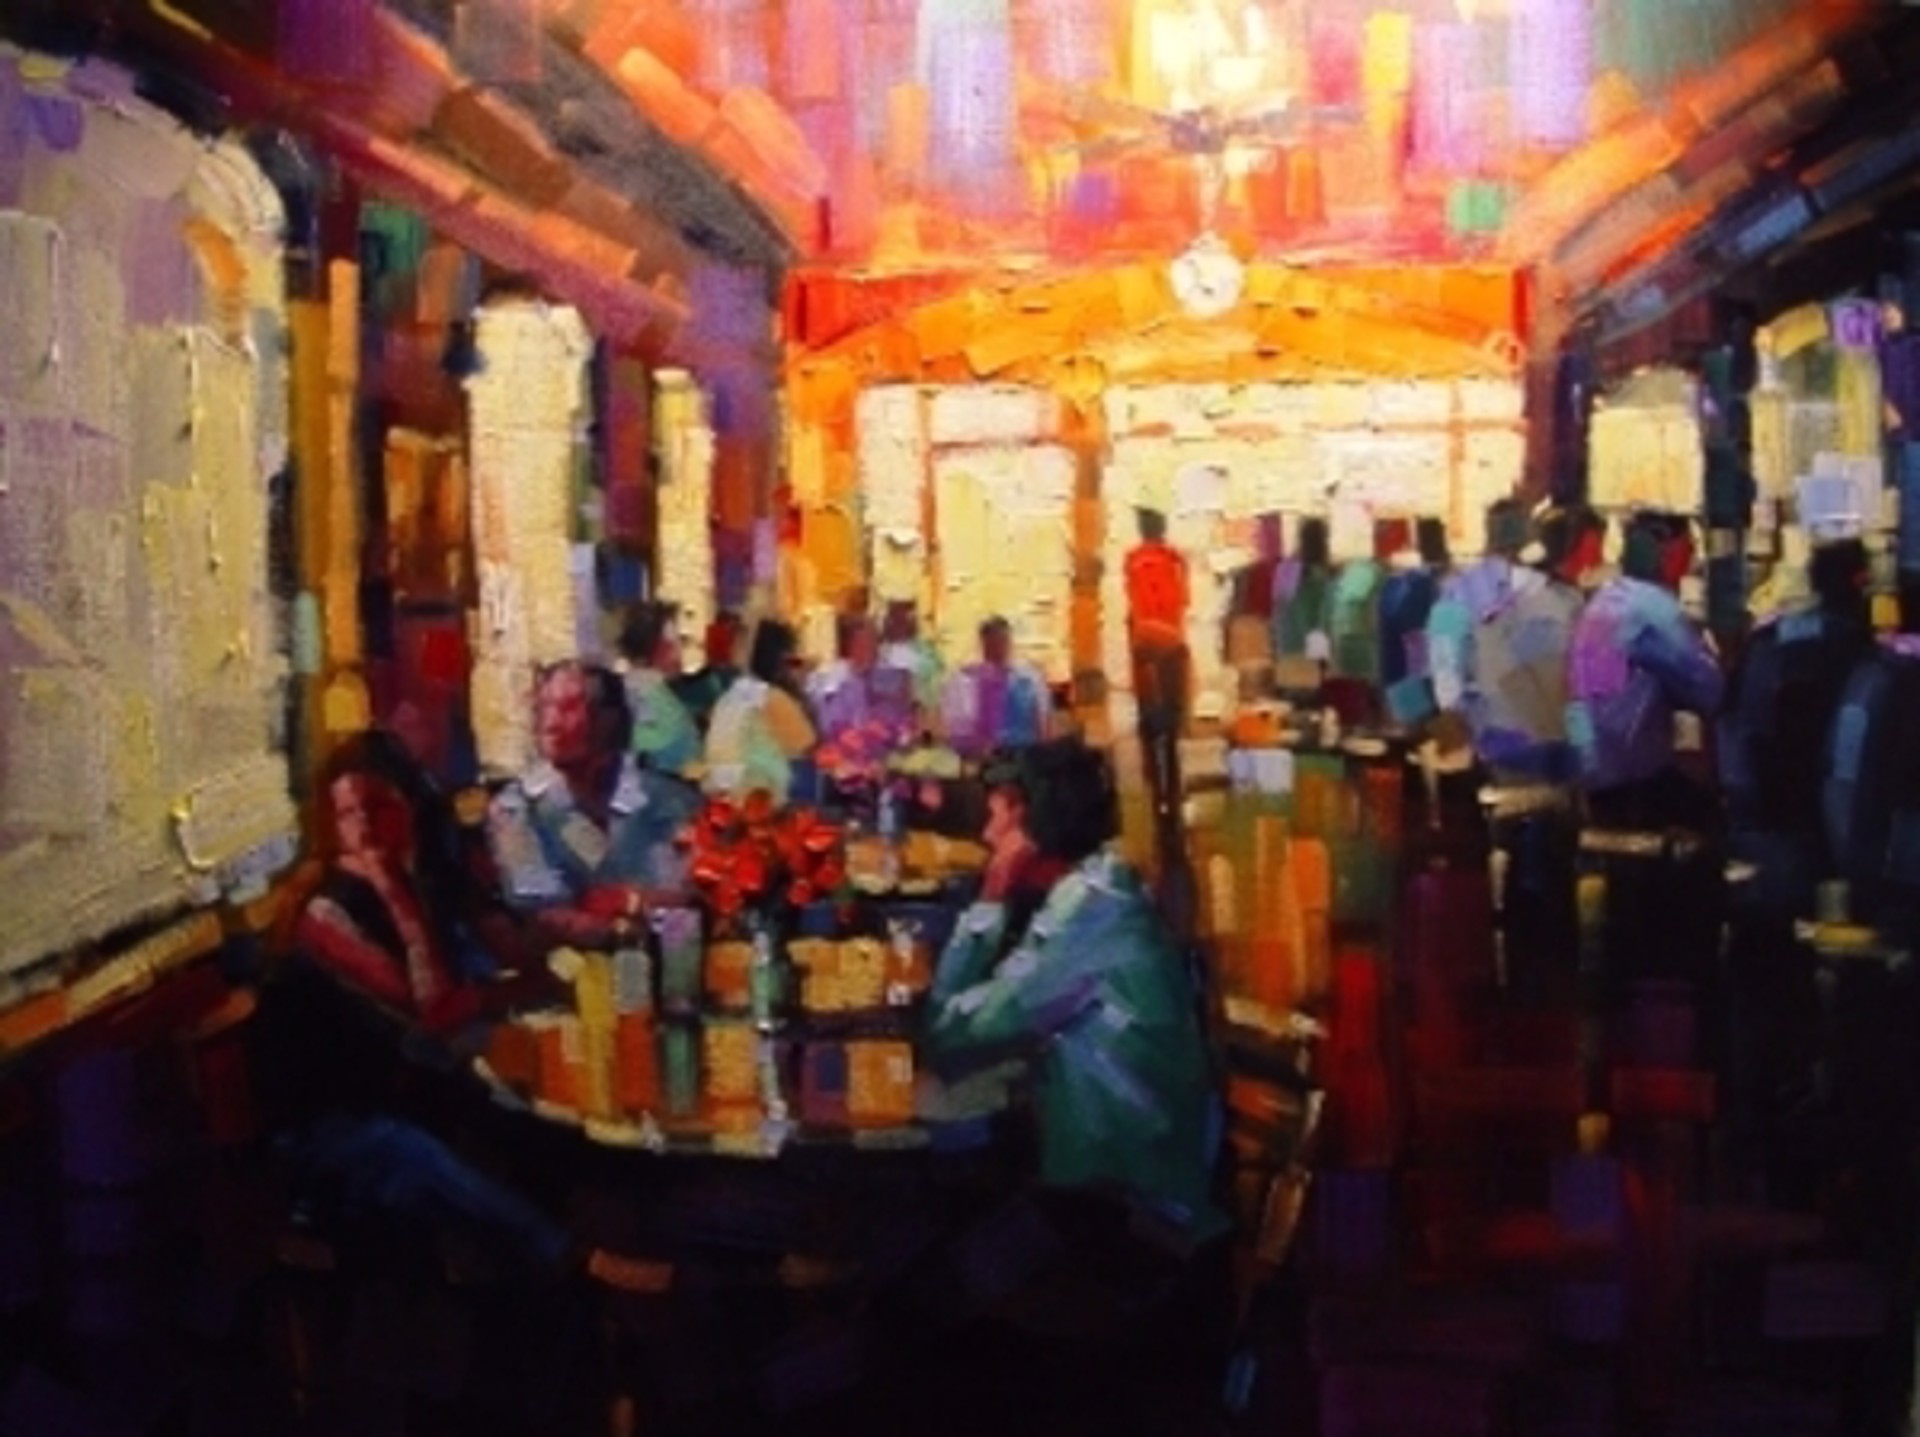 Sunset Grill by Michael Flohr